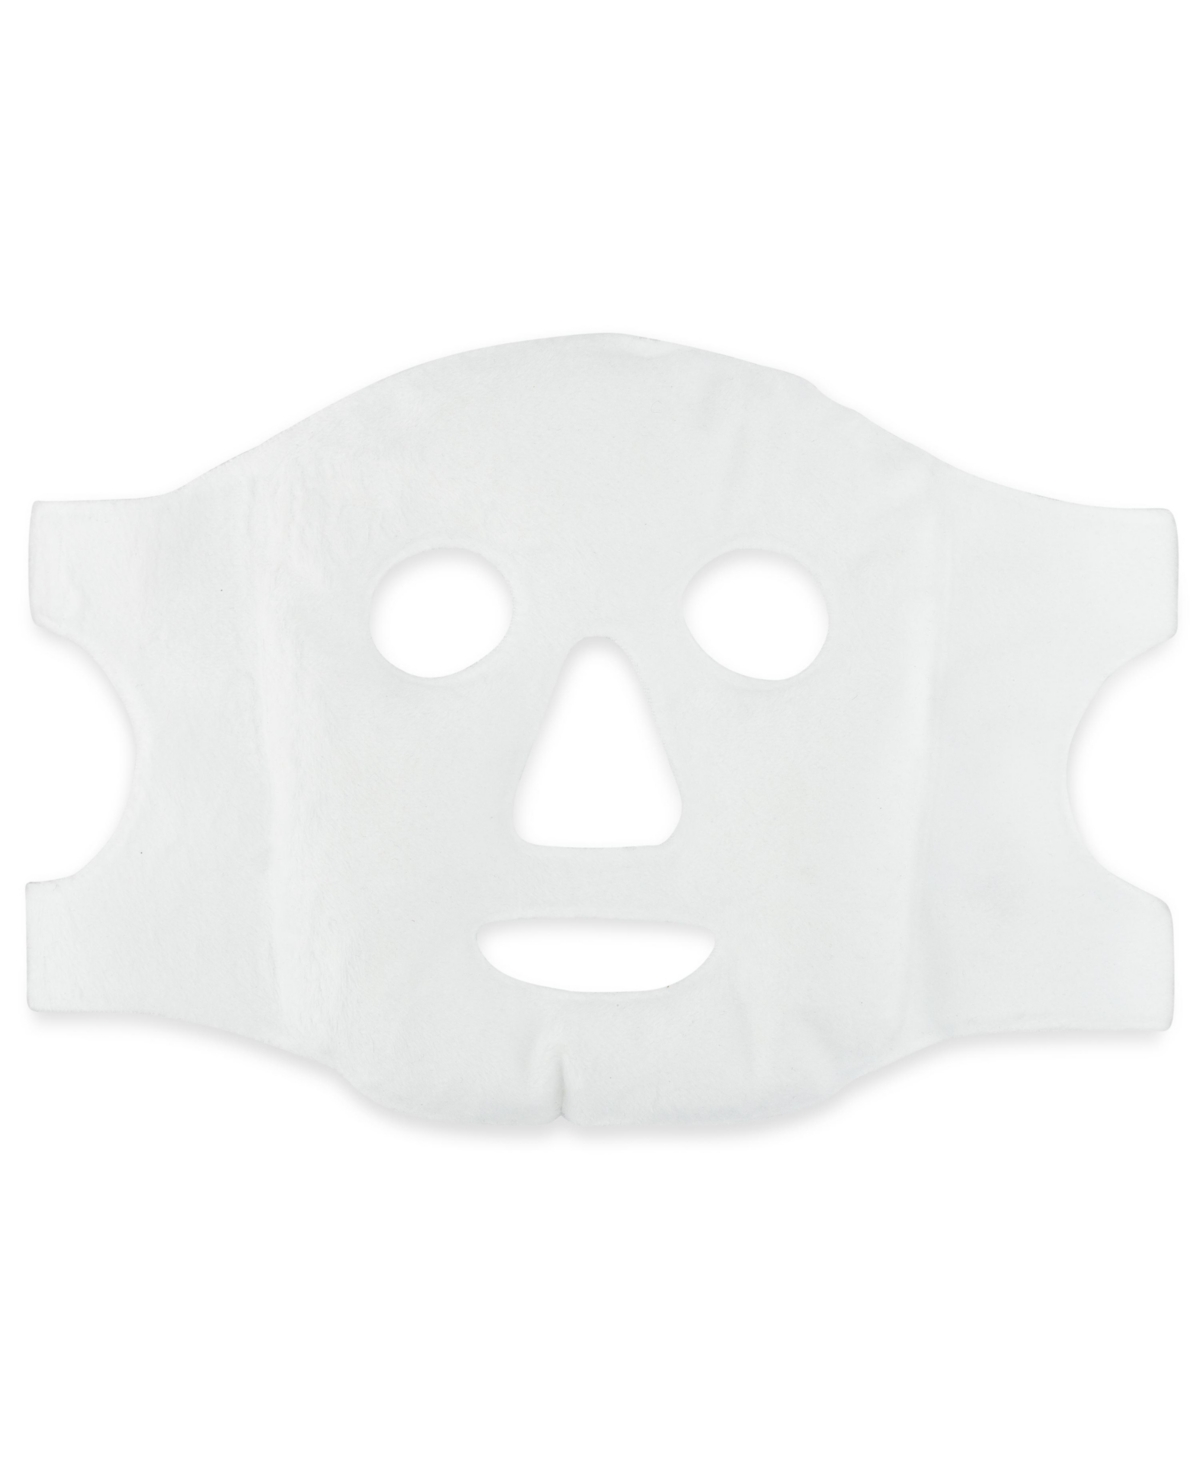 Multi-Use Heat & Ice Therapy Face Mask - White